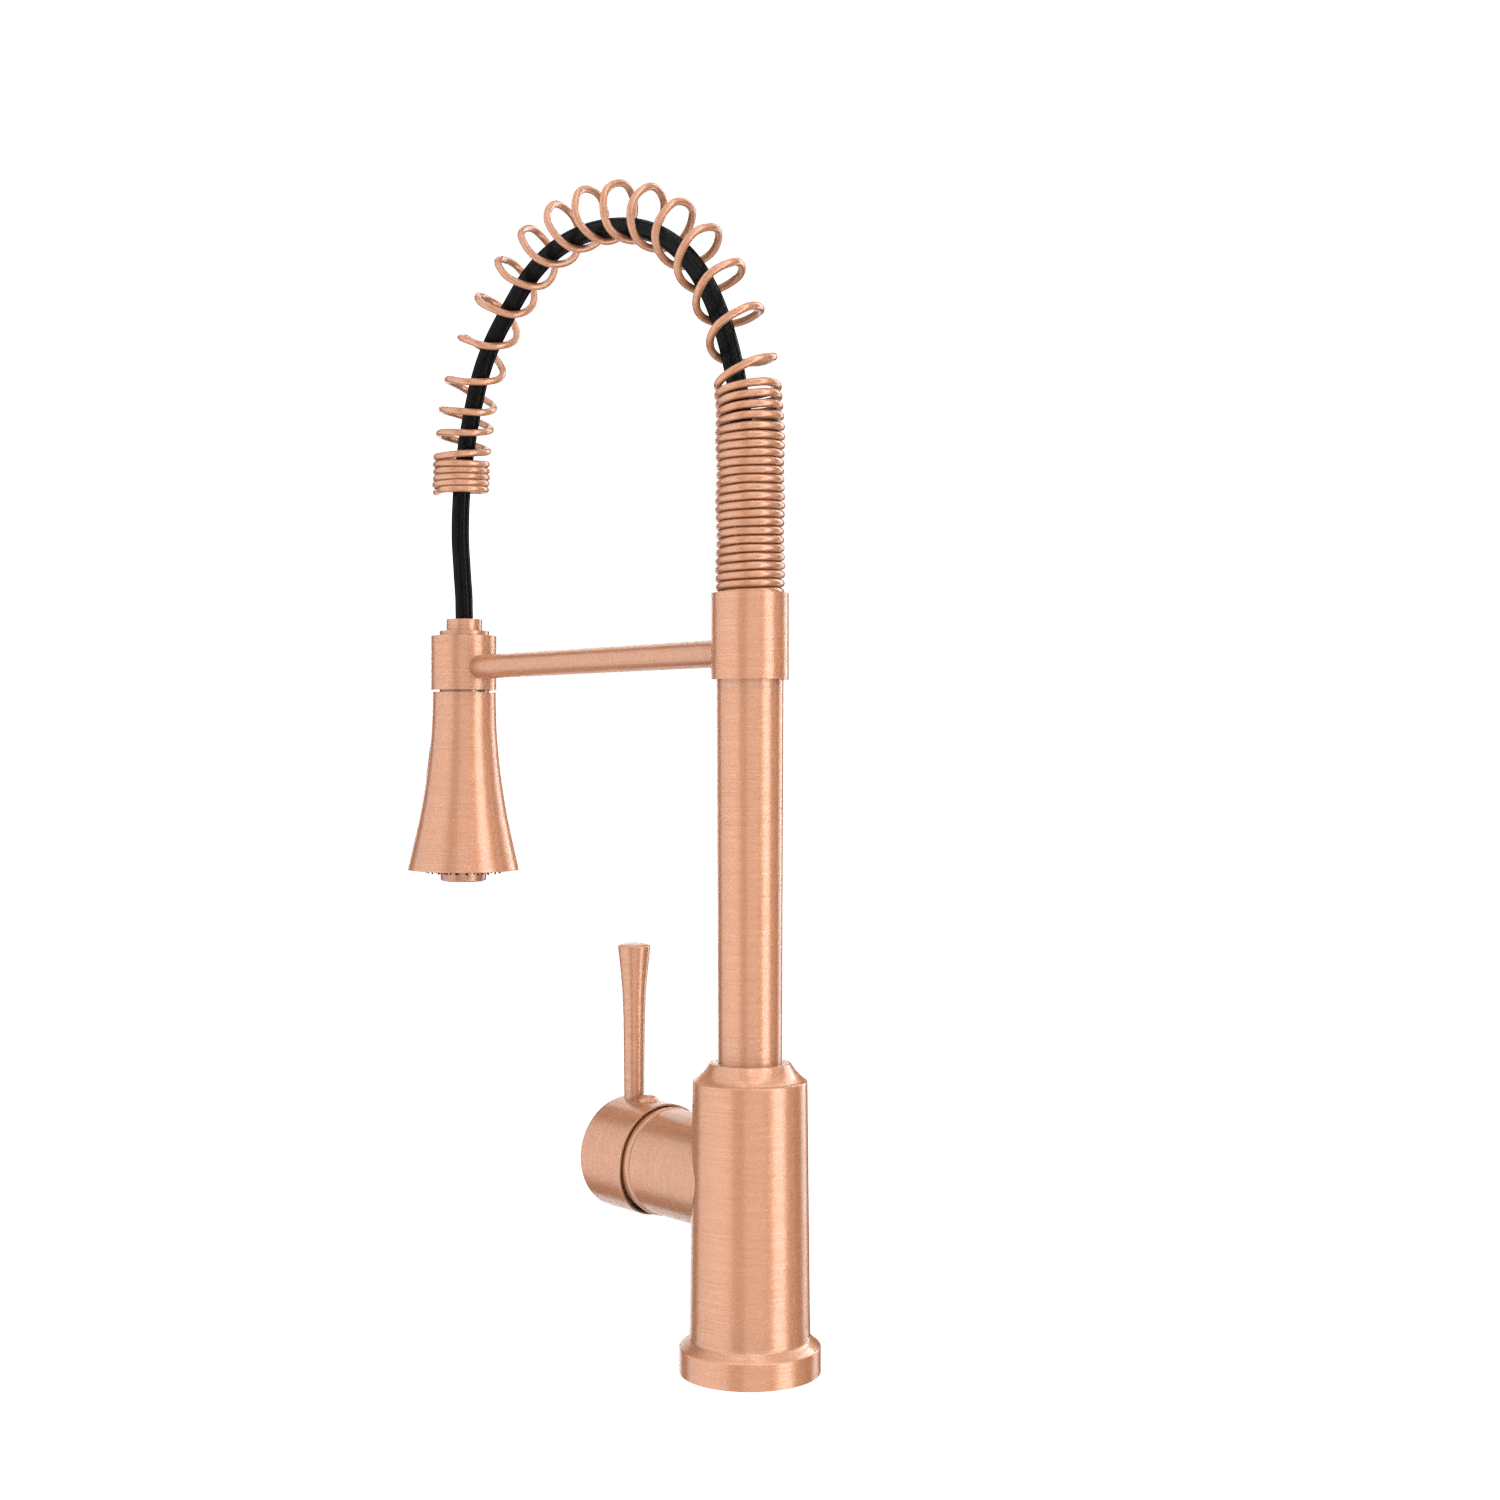 Copper Kitchen Faucet with Soap Dispenser, Single Handle Solid Brass High Arc Pull Down Sprayer Head Kitchen Sink Faucets with Deck Plate